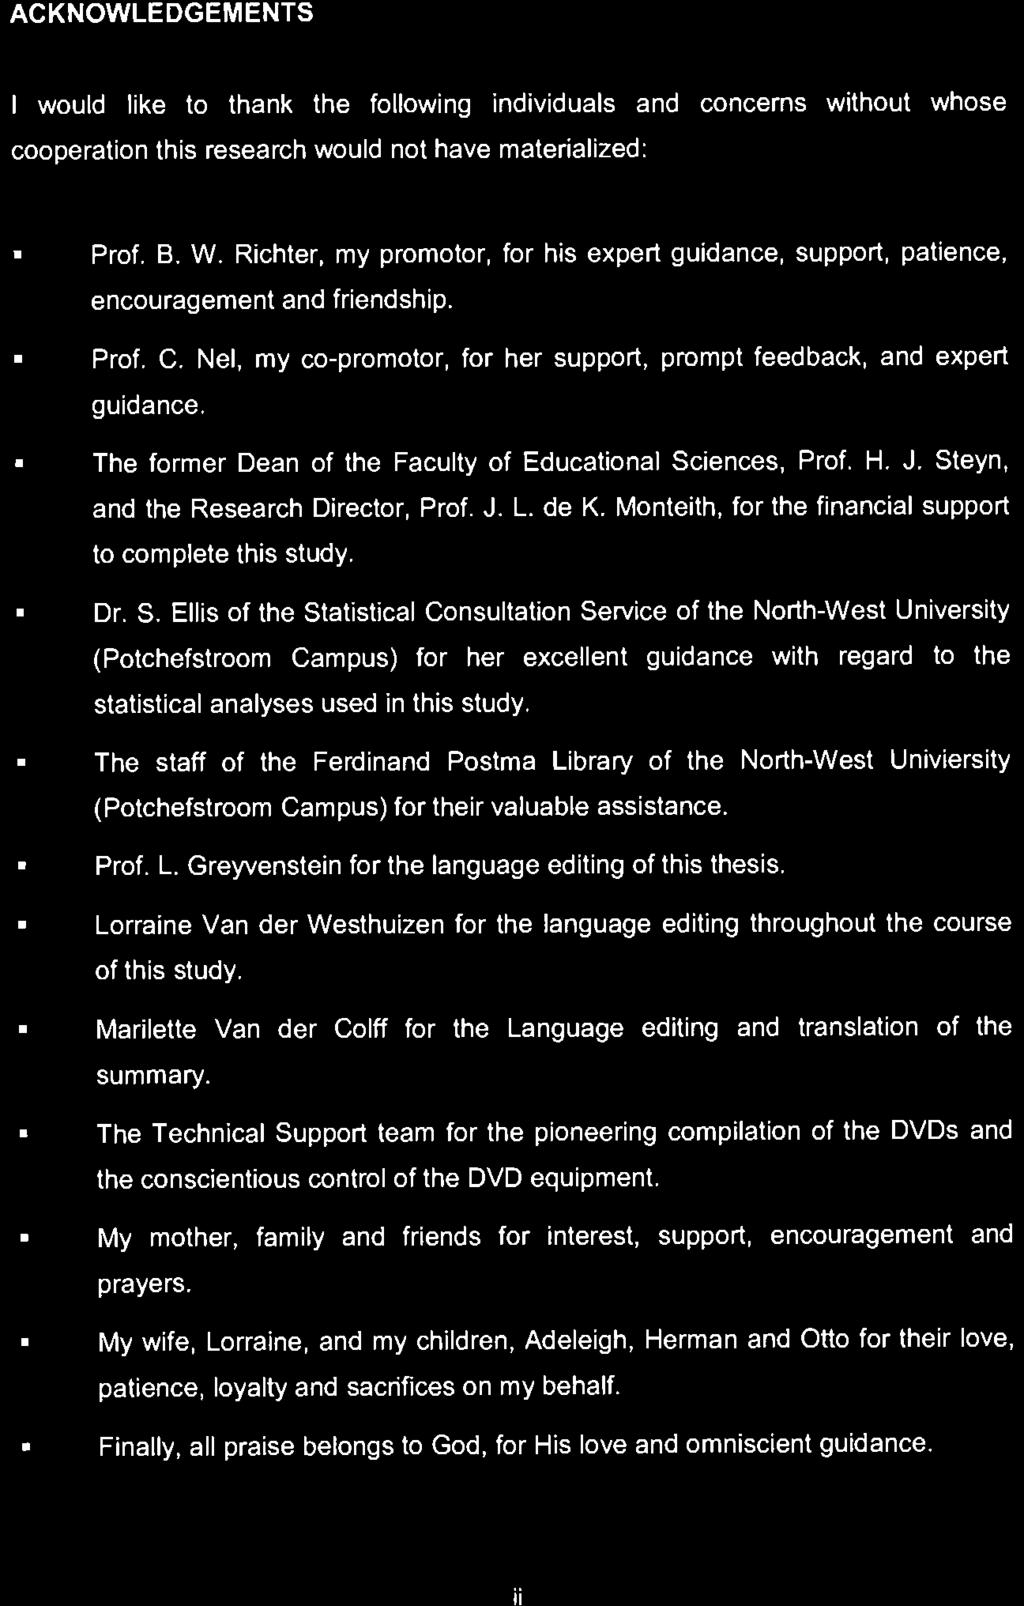 ACKNOWLEDGEMENTS I would like ta thank the following individuals and concerns without whose cooperation this research would not have materialized: Prof. 6. W.